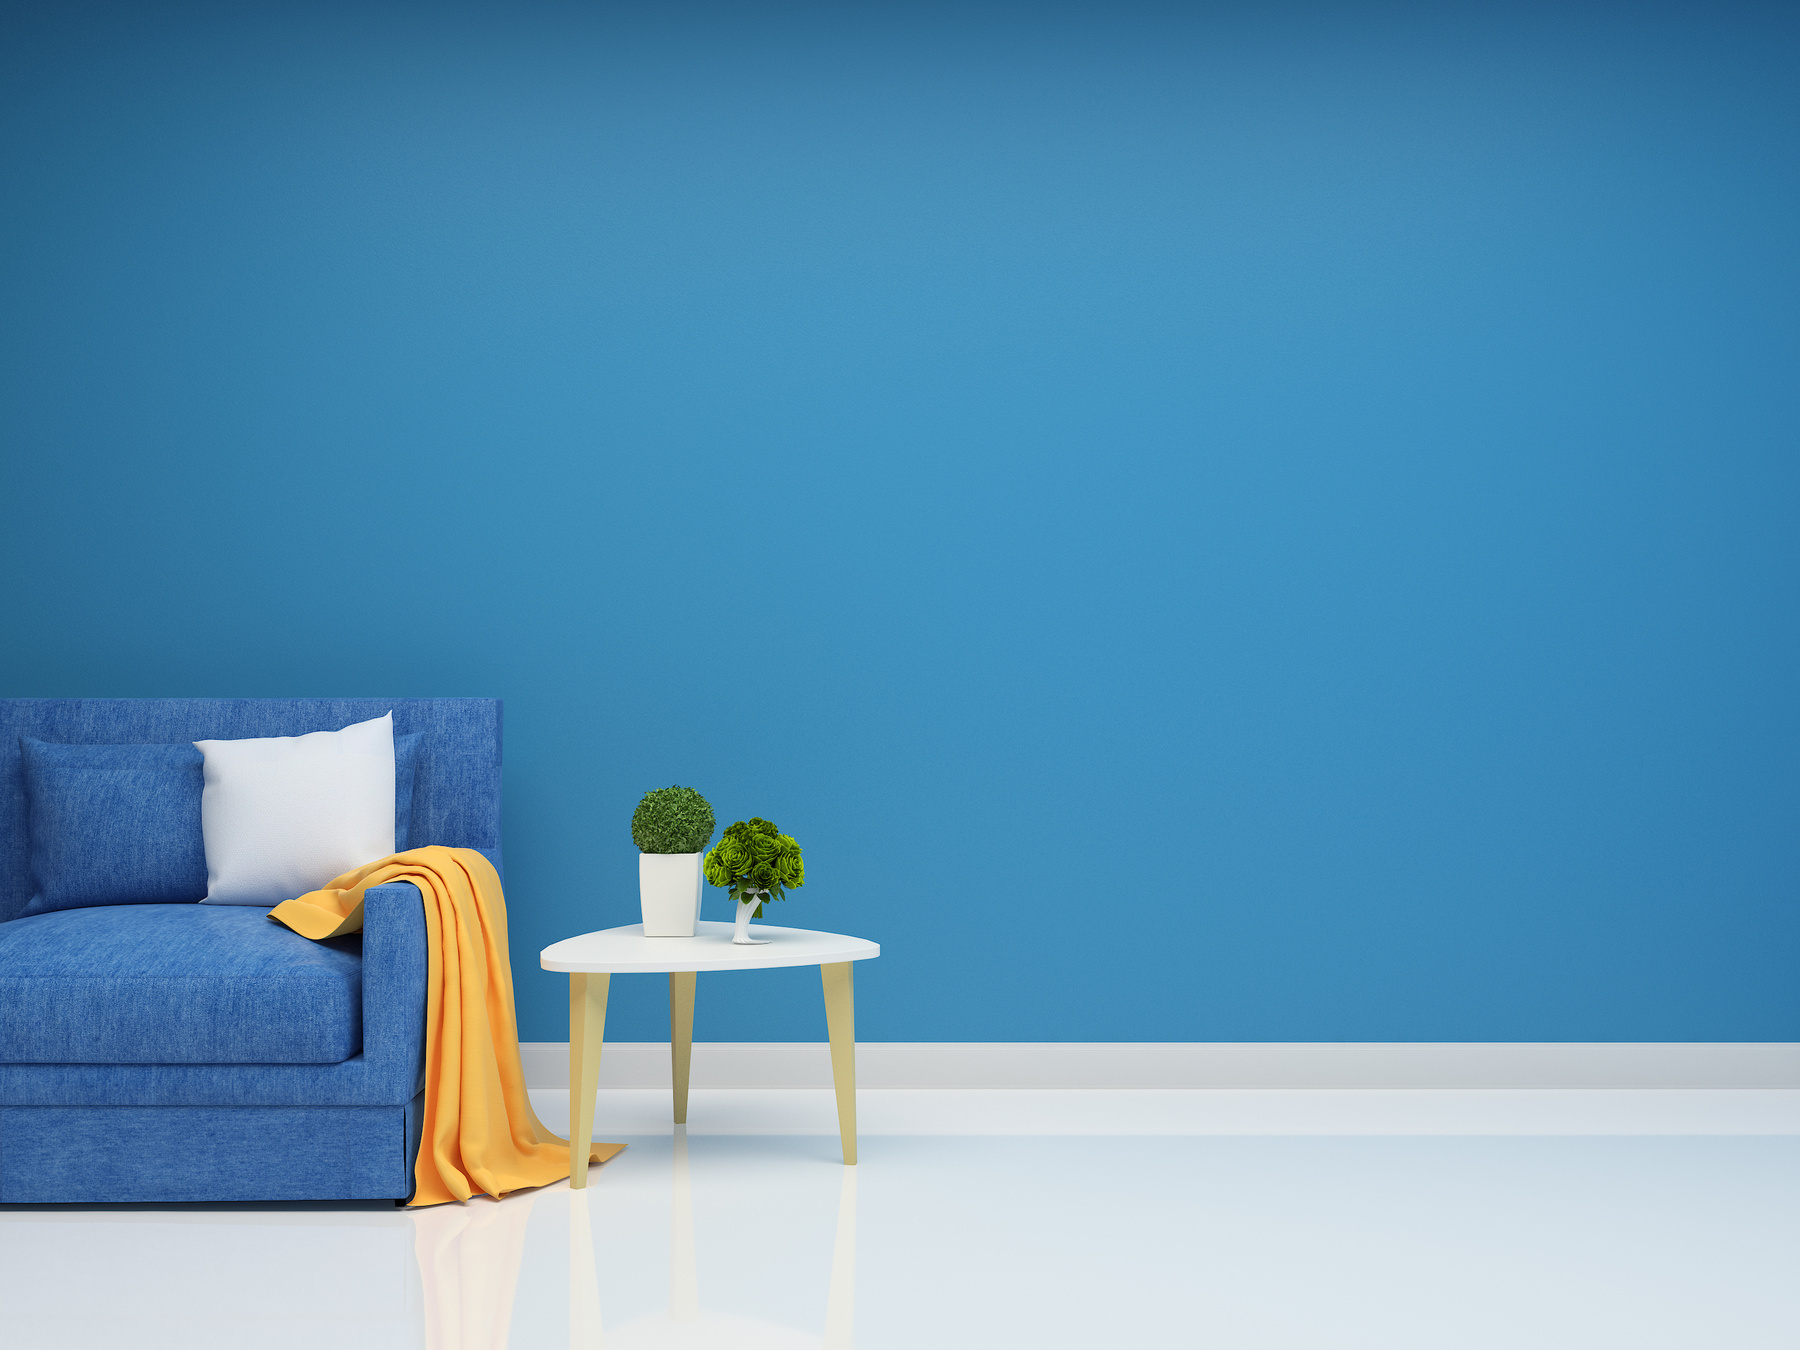 Blue Sofa and Wall Living Room Interior Background